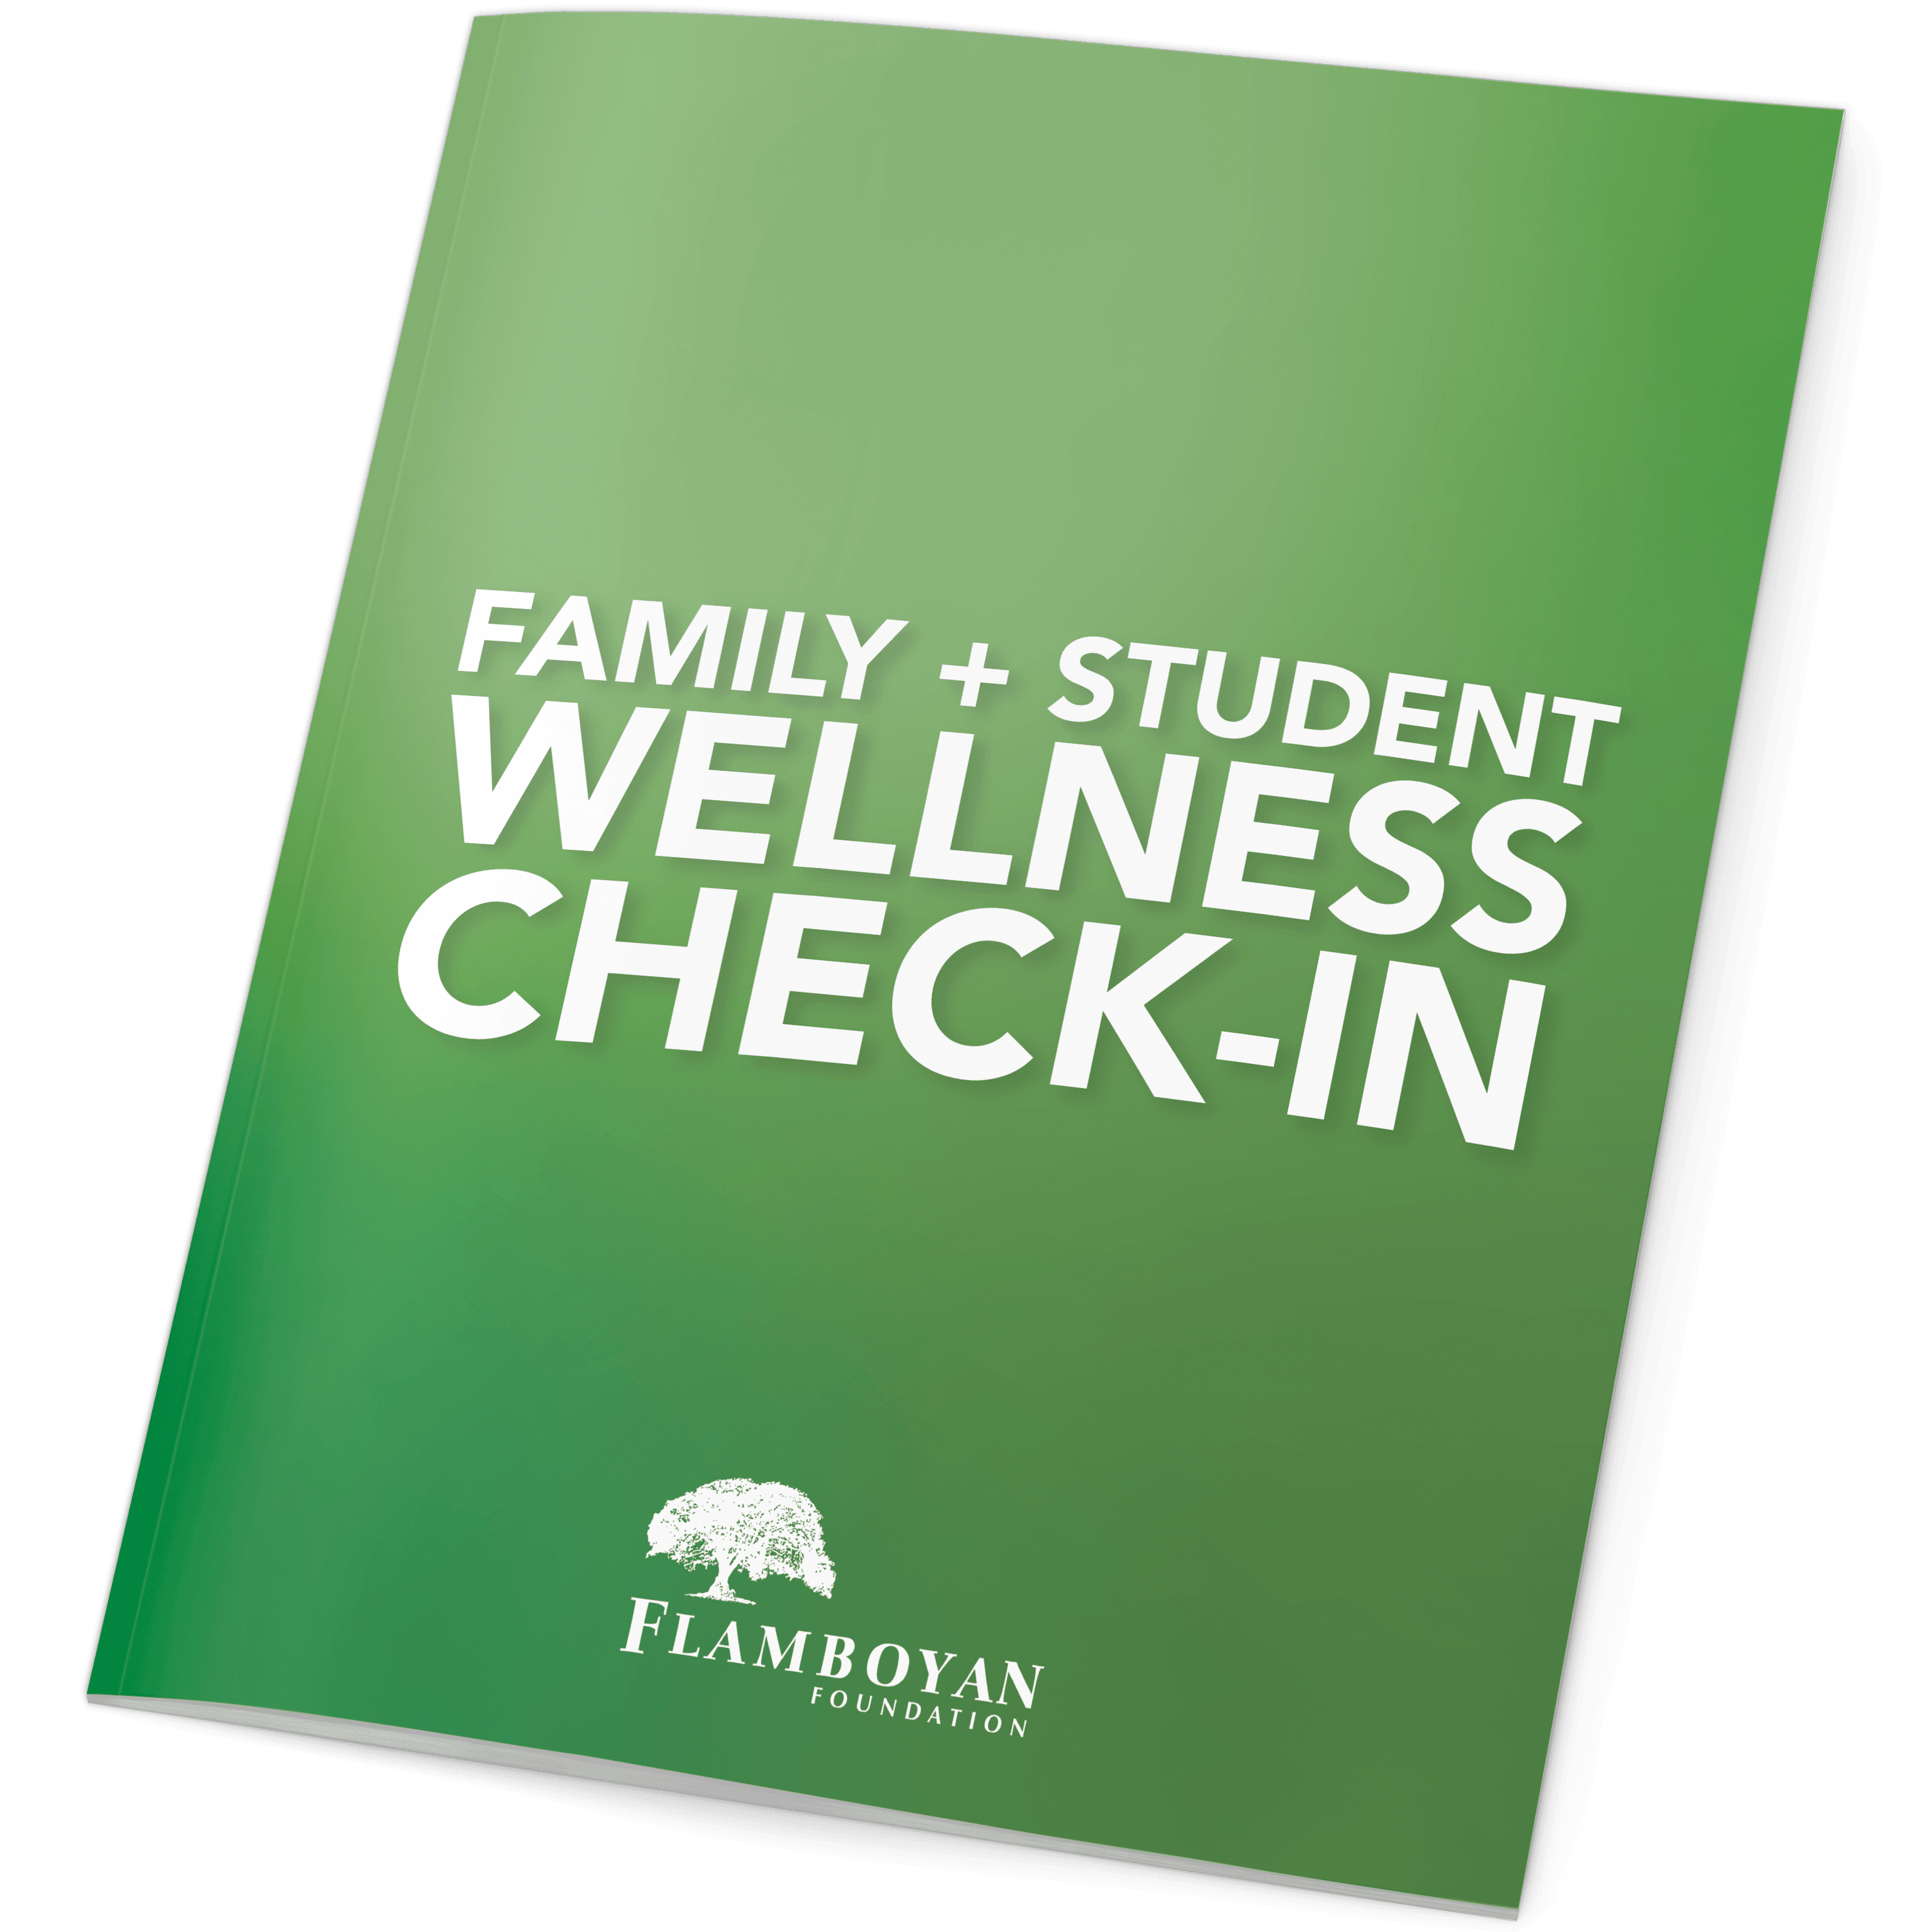 Family + Student Wellness Check-In by Flamboyan Foundation